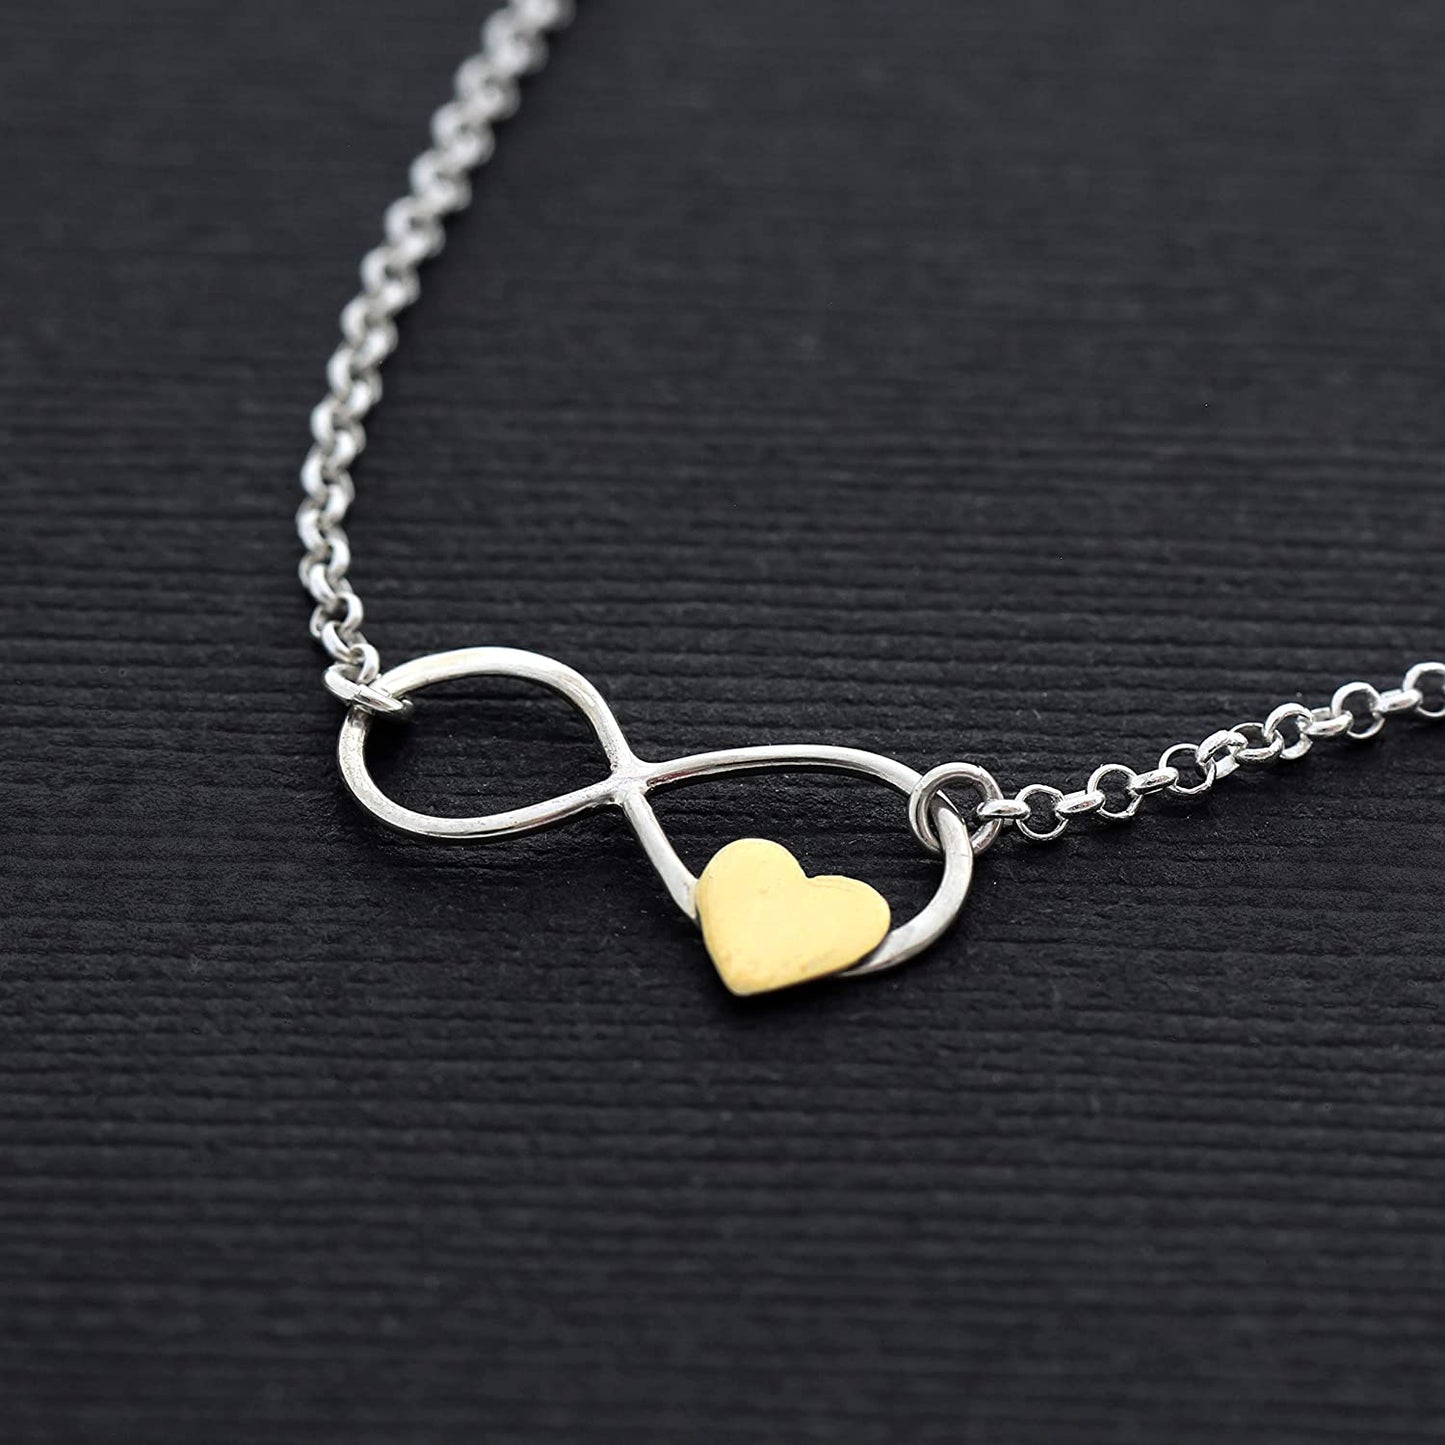 Memorial Gift for Loss of Loved One • Infinite Love Necklace • 925 Sterling Silver • In Memory of • Subtle Sympathy Gift • A Piece of My Heart is in Heaven